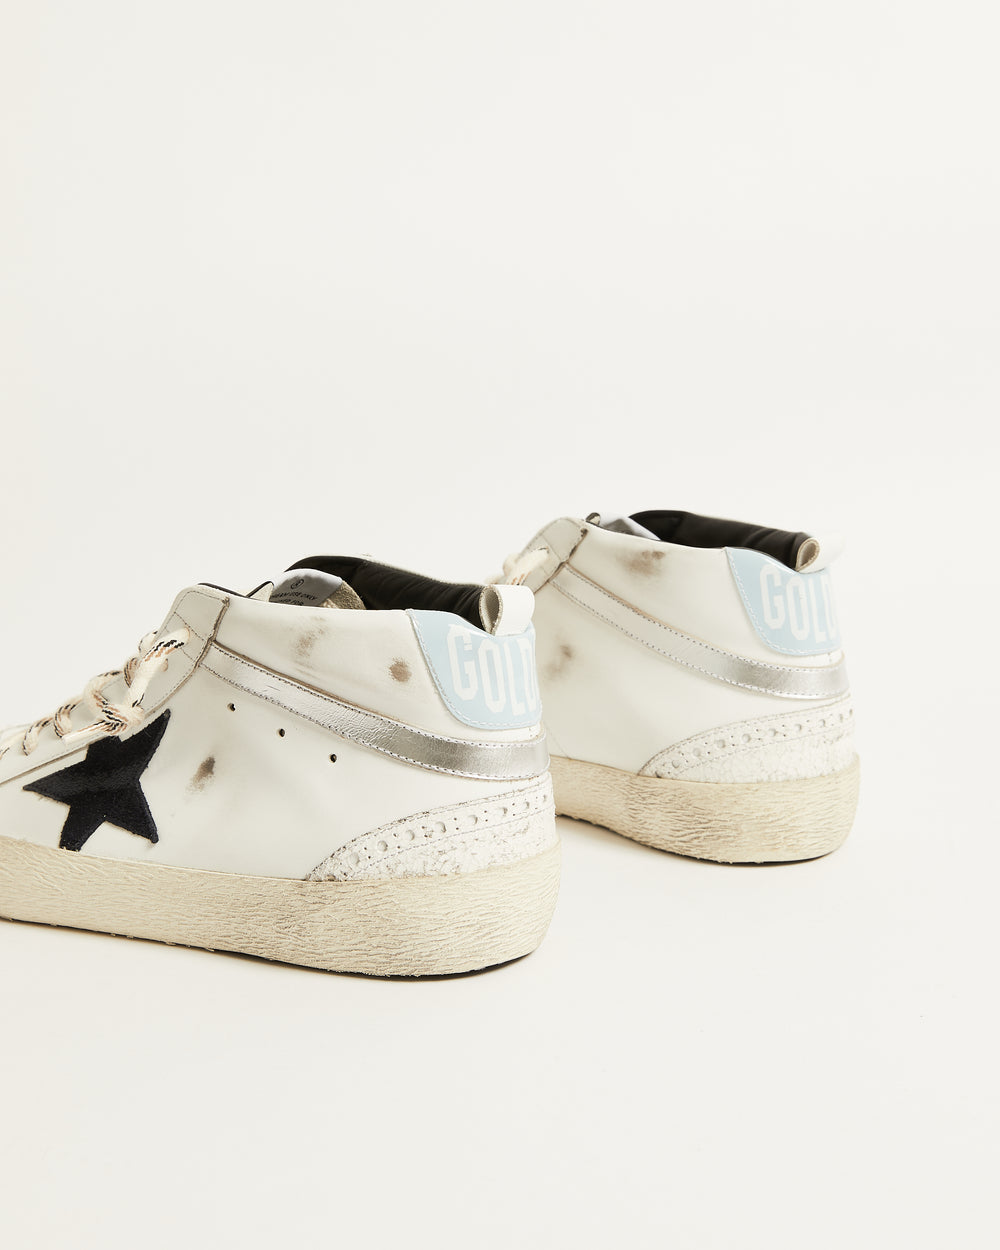 Mid Star in Cracked Leather Toe w/ Suede Black Star and Patent Blue Heel